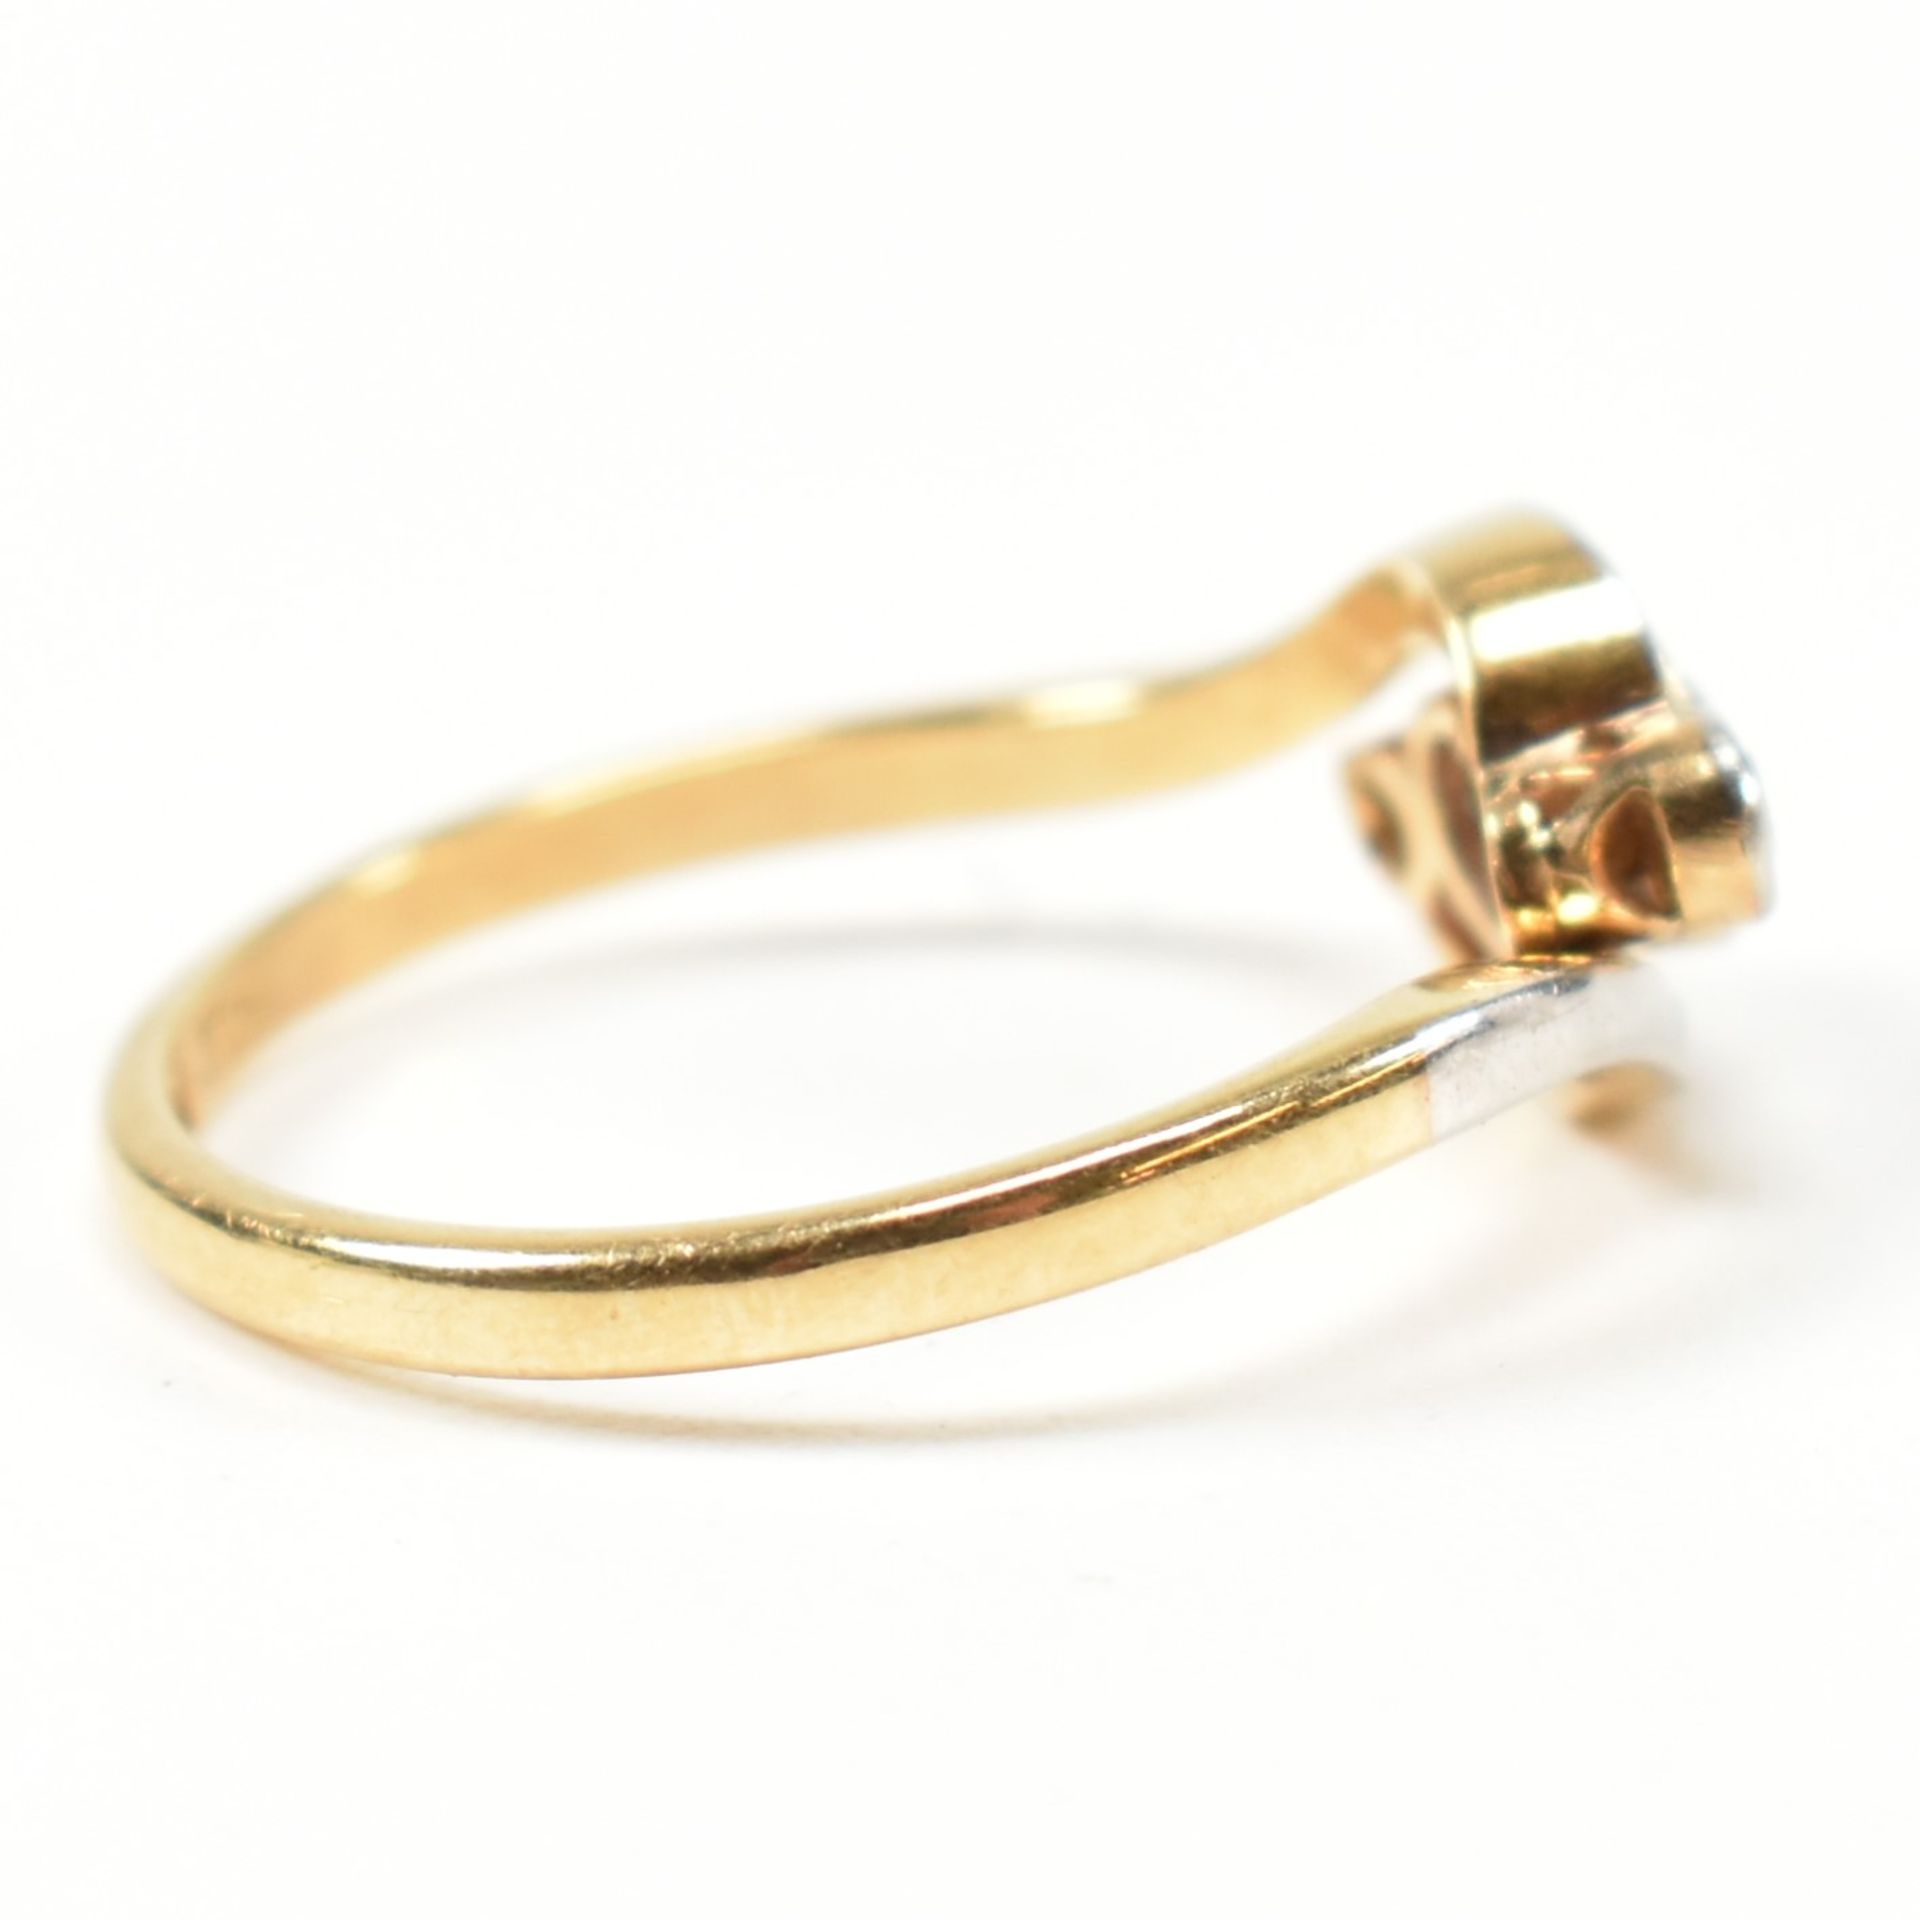 18CT GOLD DIAMOND & SAPPHIRE CROSSOVER RING - Image 4 of 9